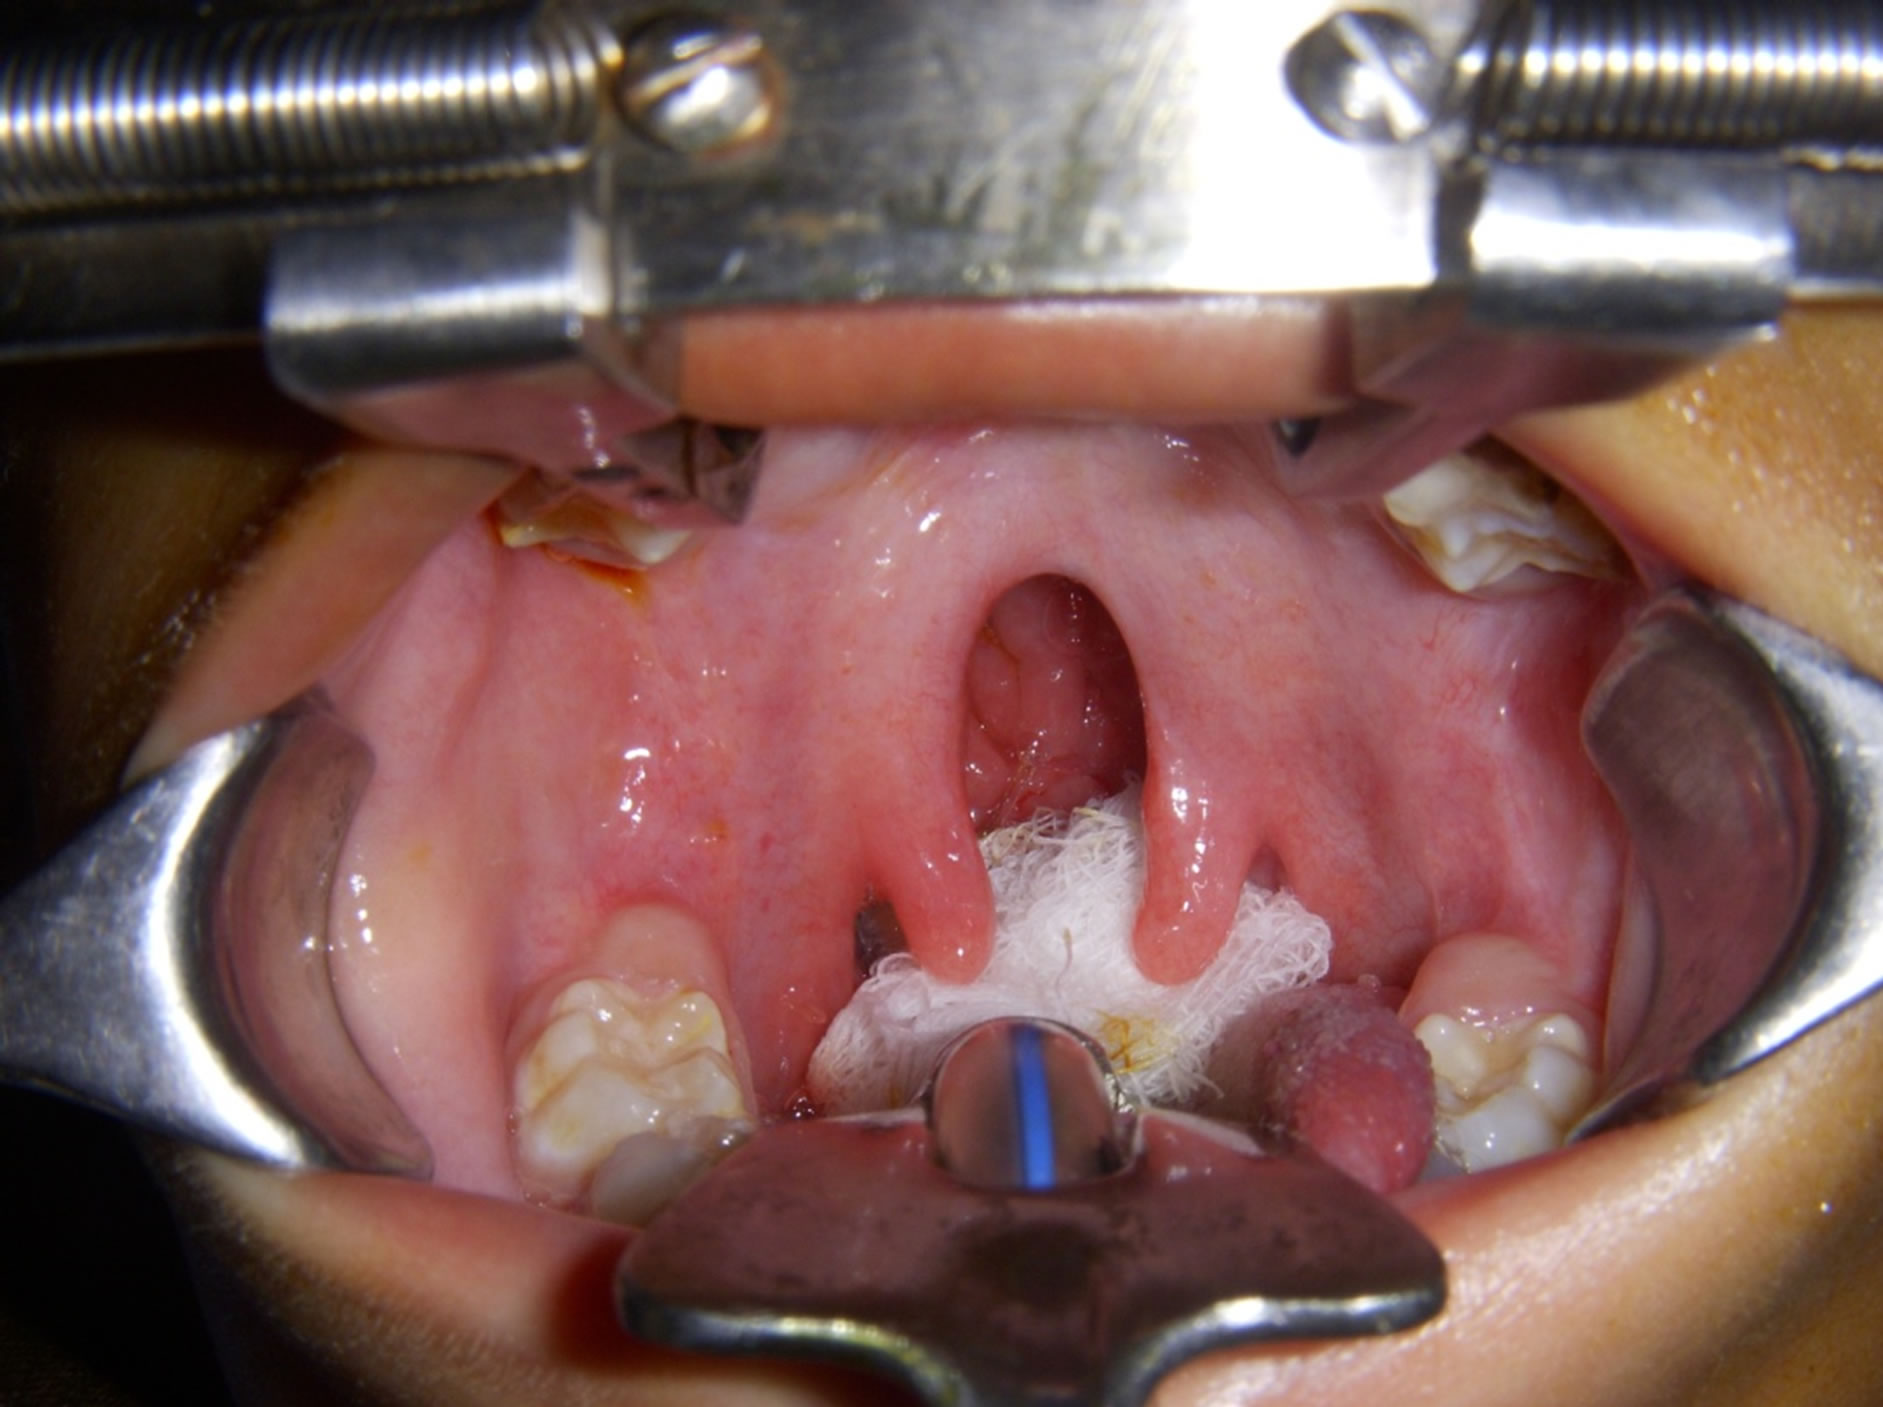 Perioperative Management of Cleft Palate Repair in a Patient with